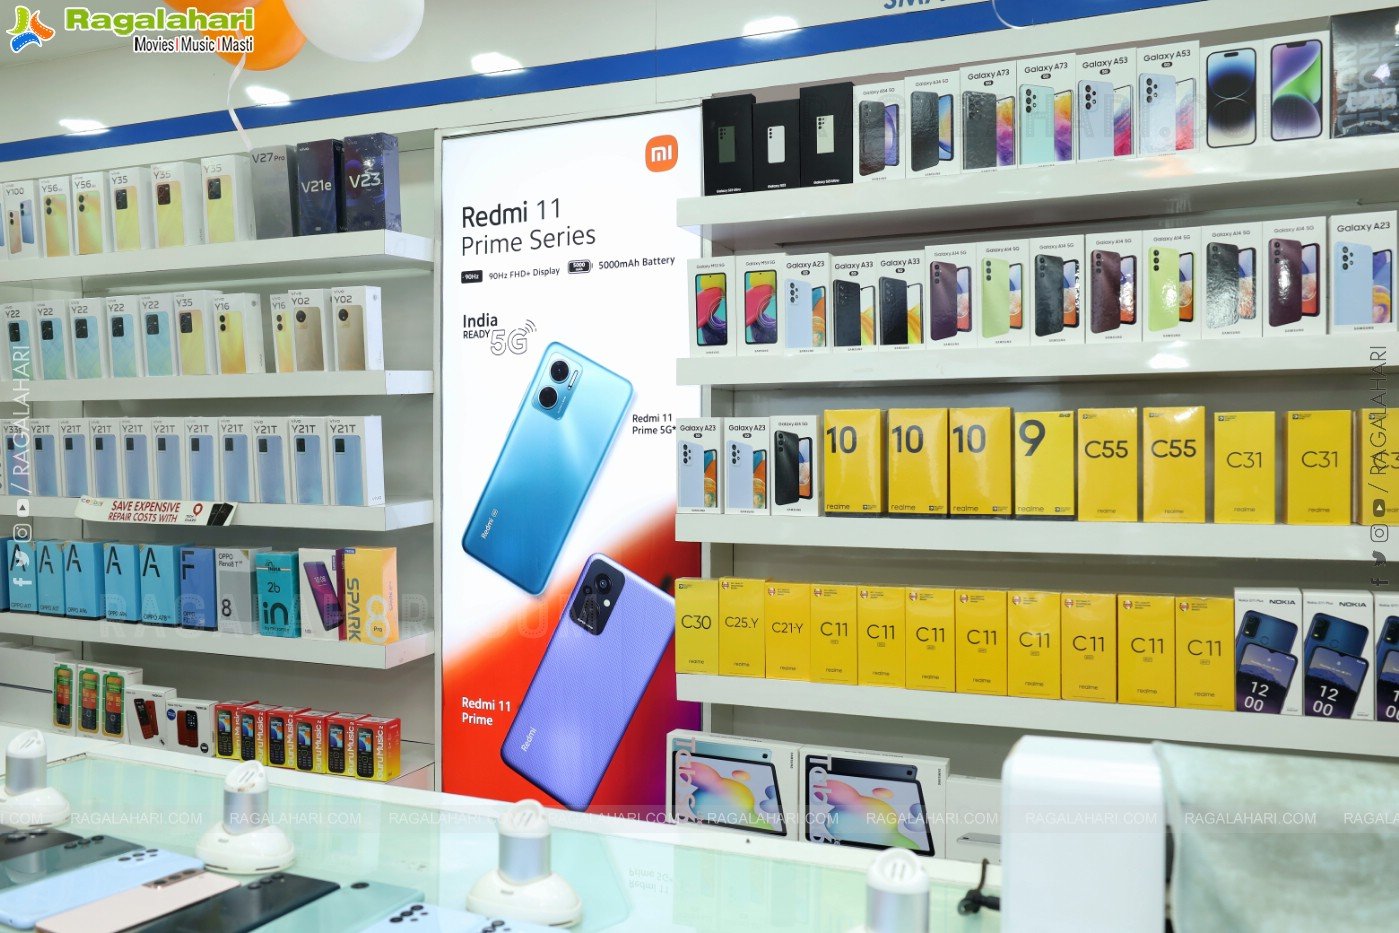 Grand Launch of Redmi 12C & Redmi Note 12 at CELL BAY